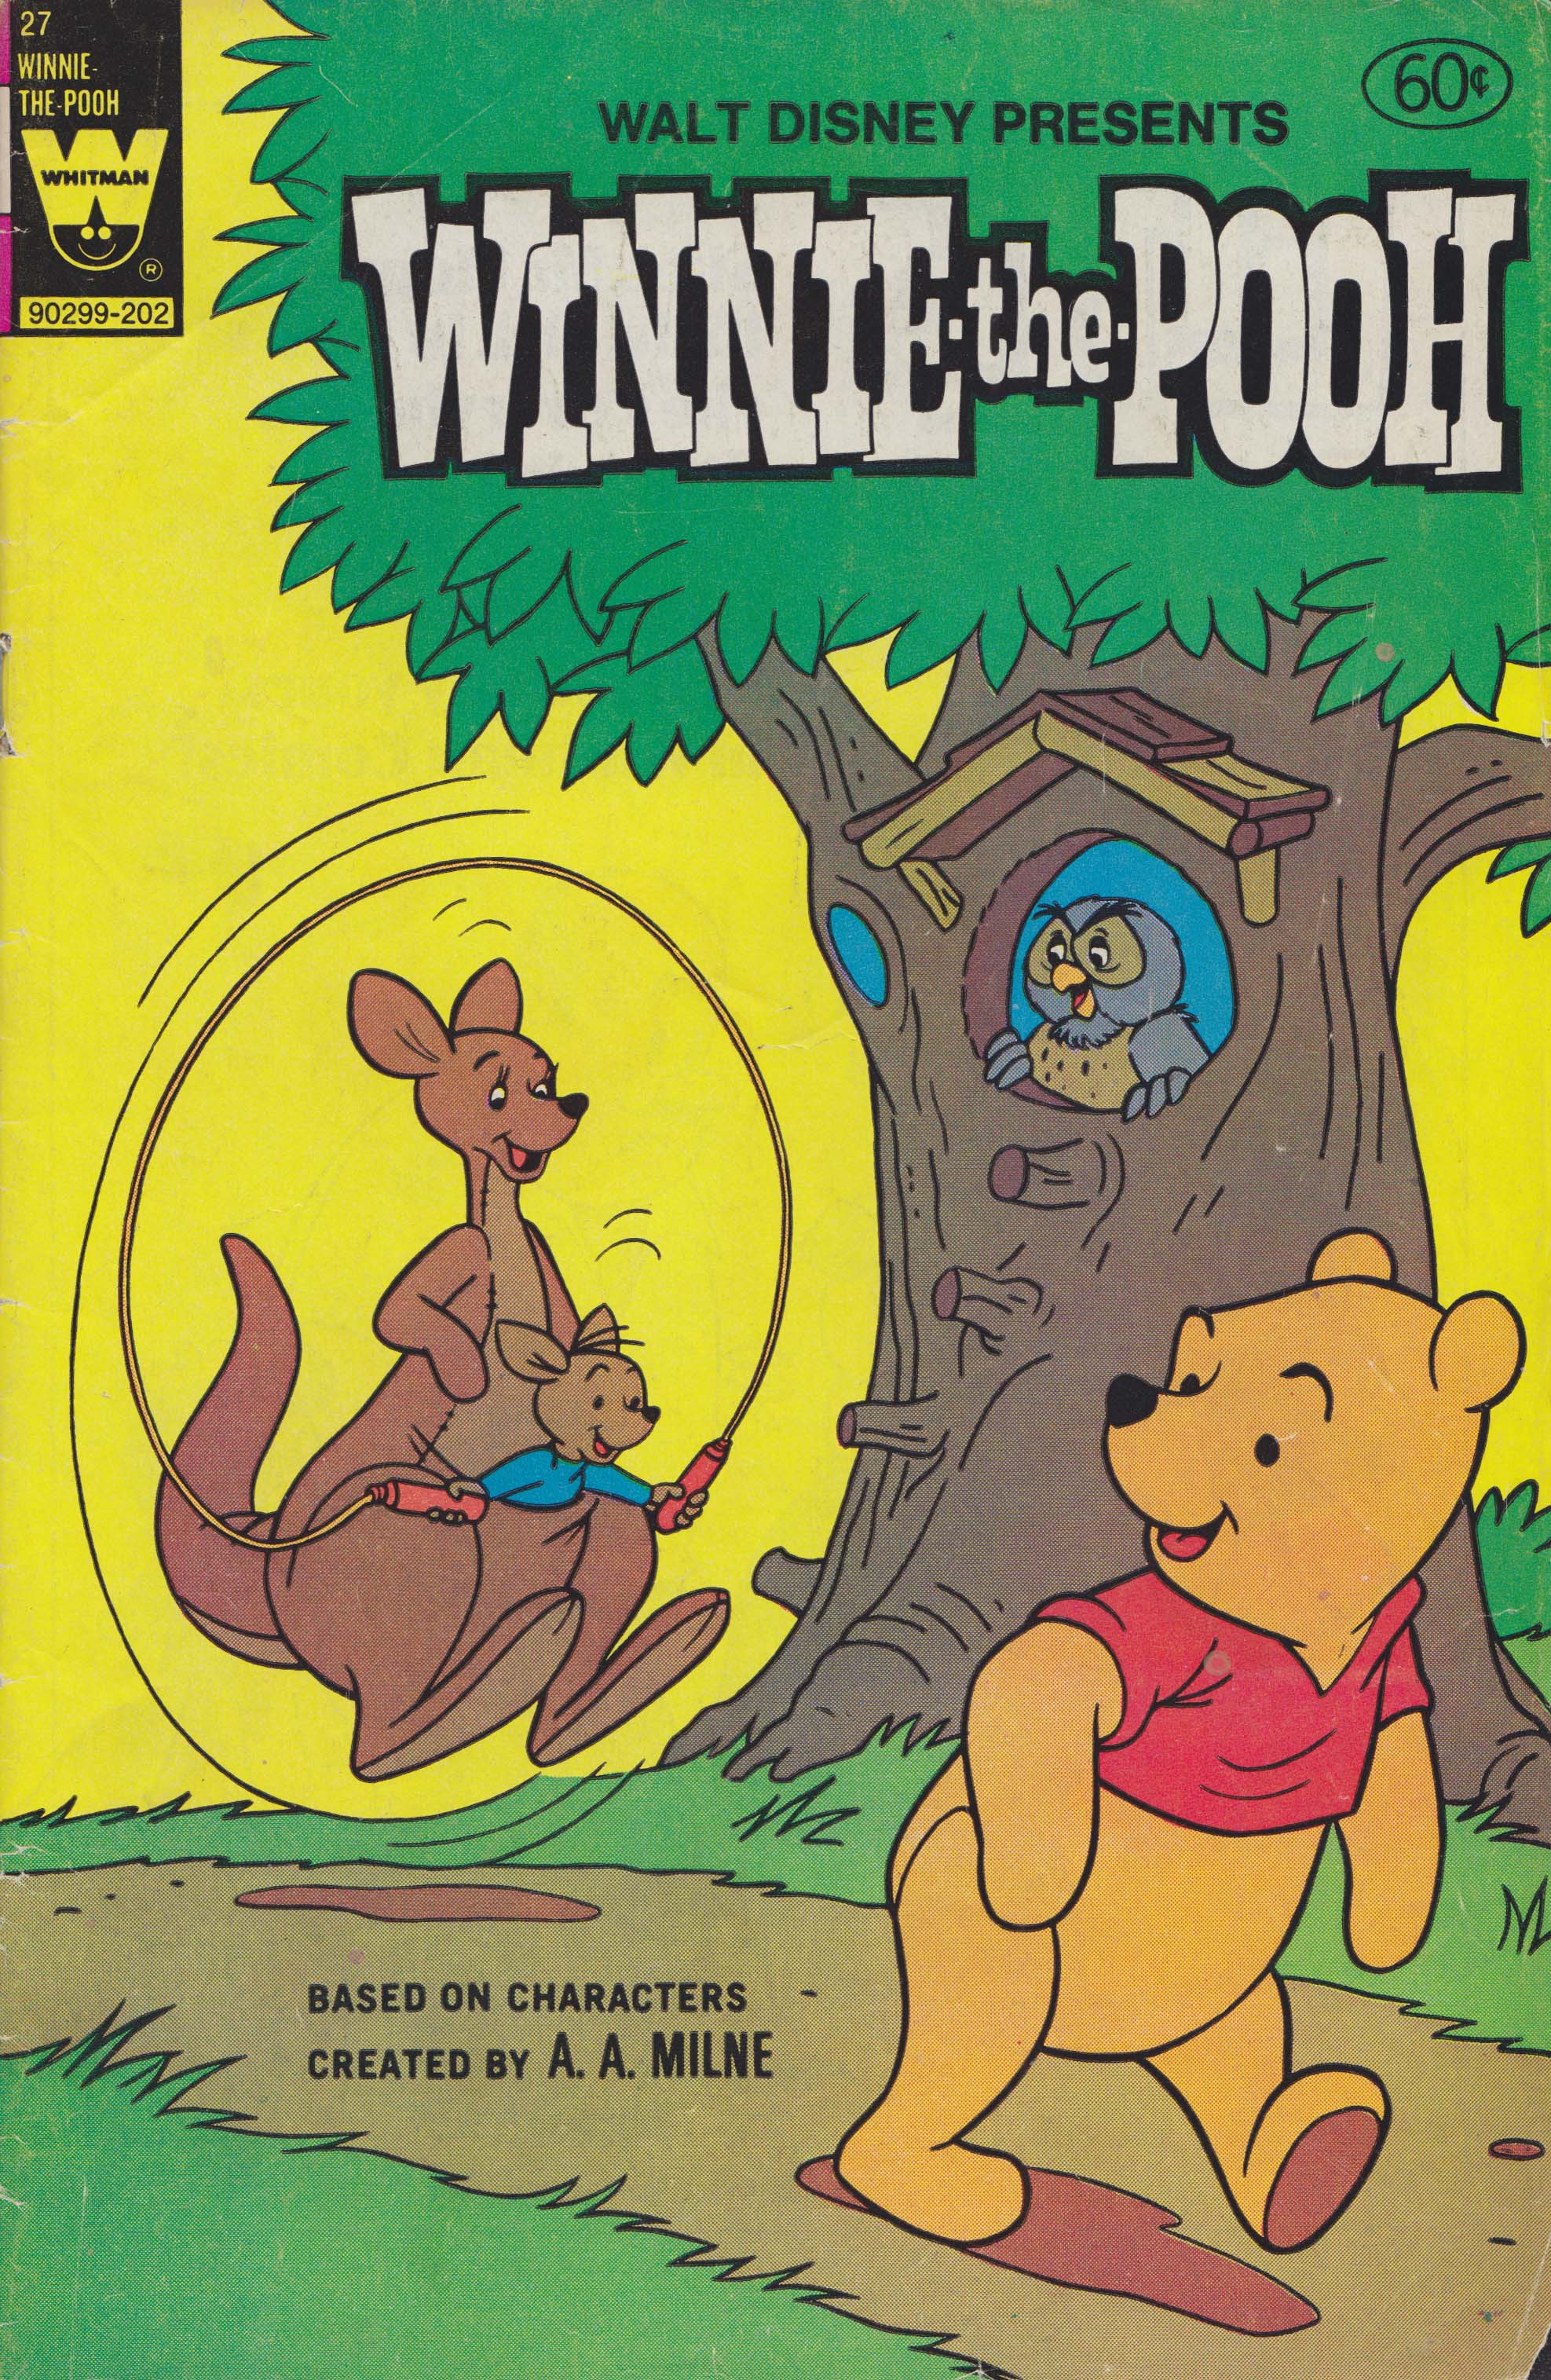 Read online Winnie-the-Pooh comic -  Issue #27 - 1